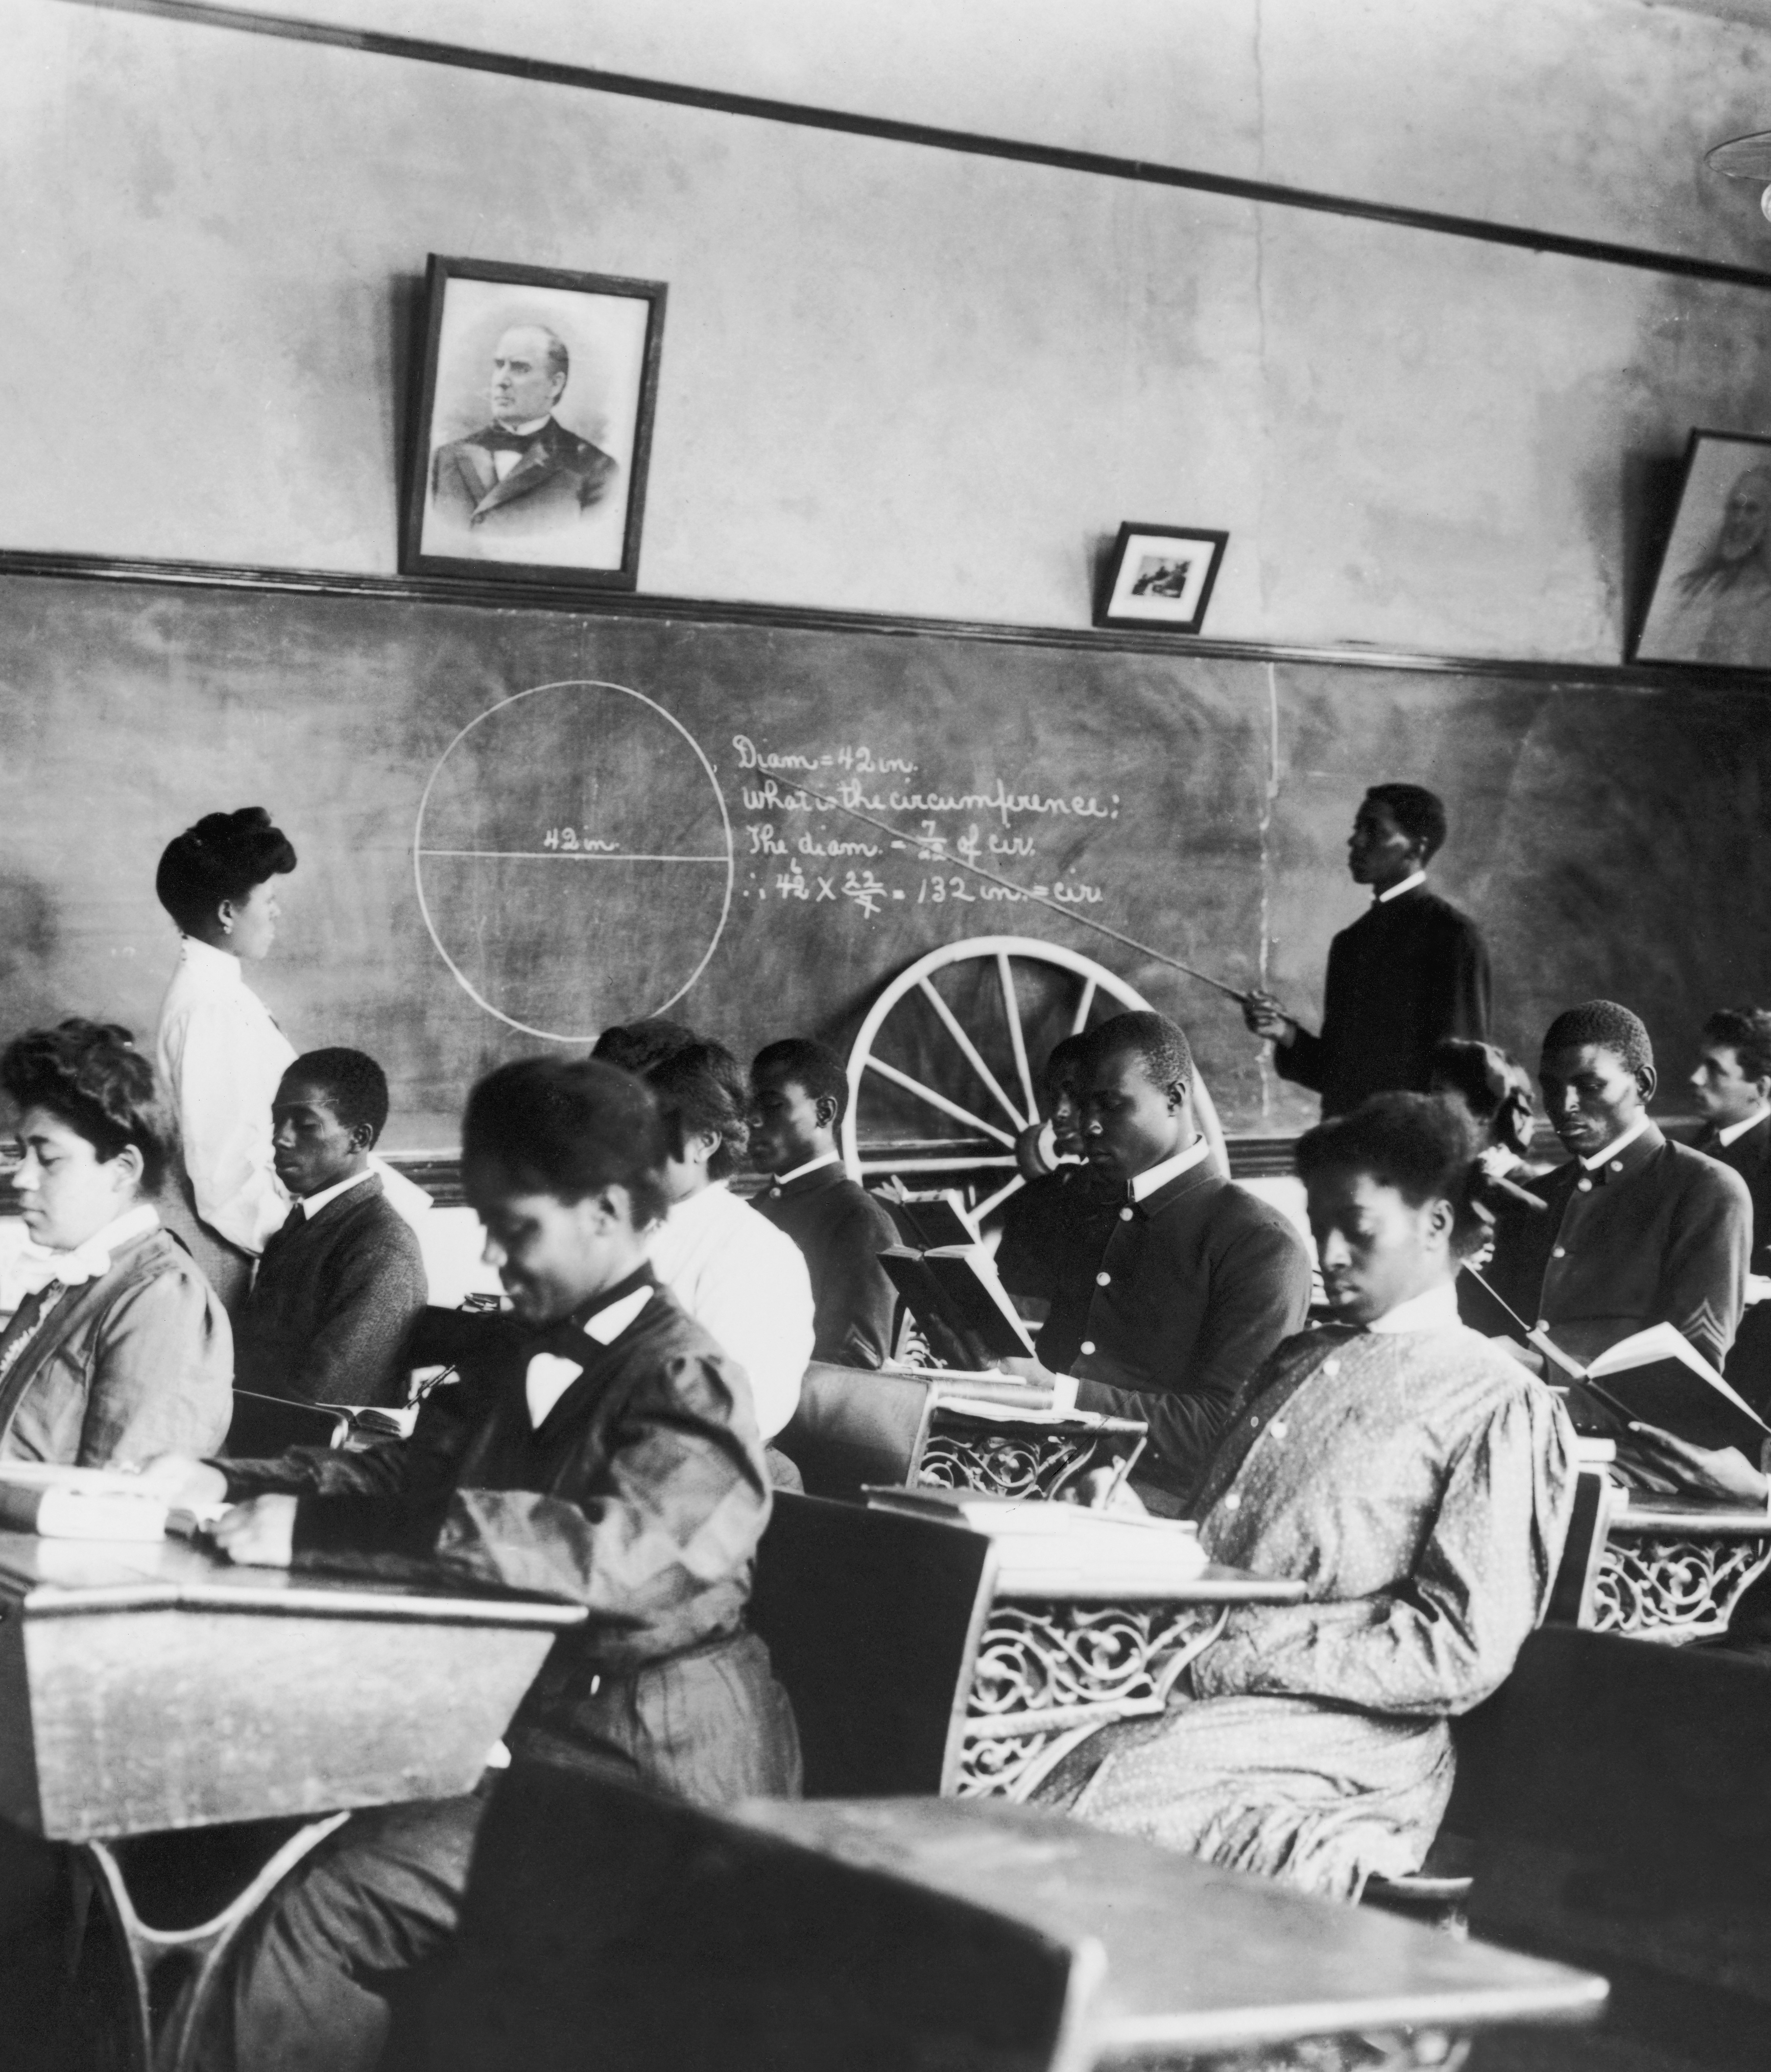 Photograph of men and women in maths class at Tuskegee Institute circa 1906